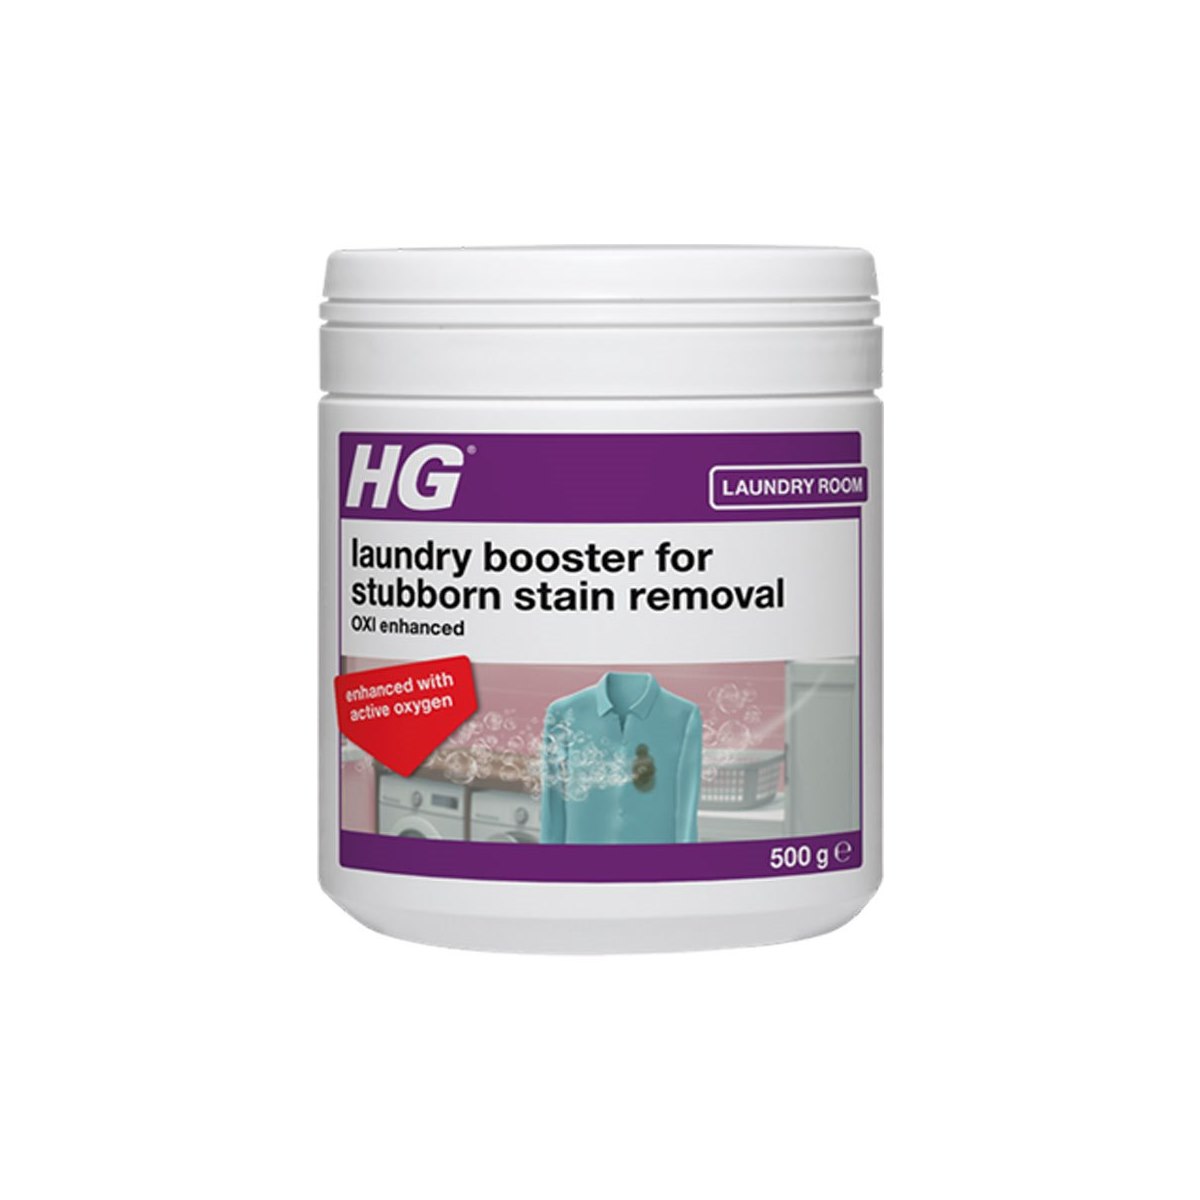 HG Laundry Booster For Stubborn Stain Removal OXI Enhanced 500g